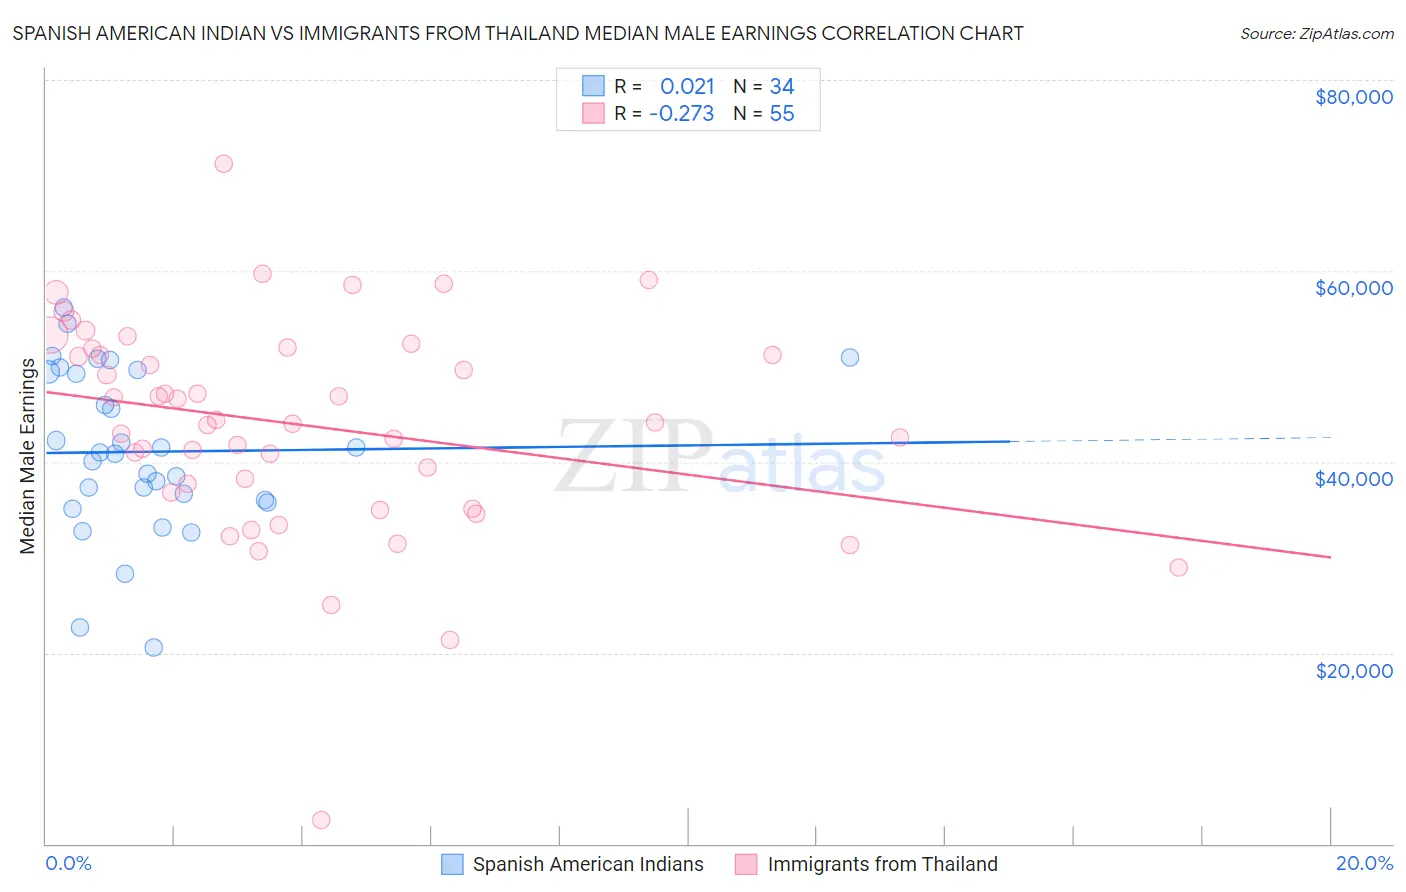 Spanish American Indian vs Immigrants from Thailand Median Male Earnings